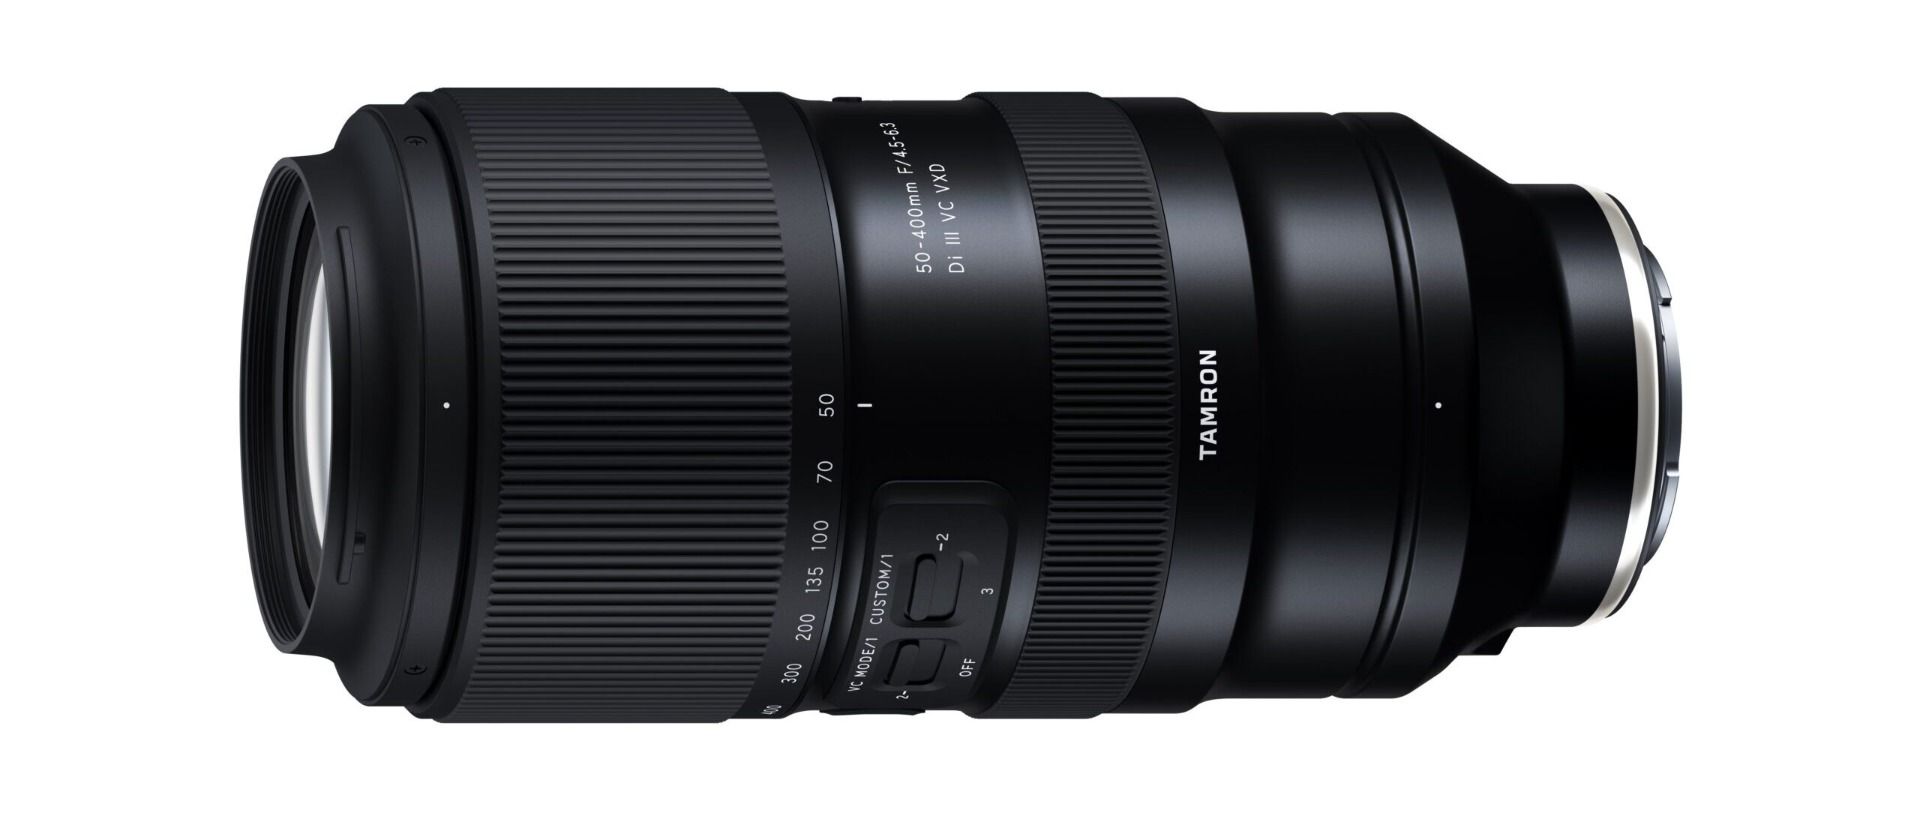 Tamron 50-400mm f/4.5-6.3 Di III VC VXD Lens for Sony E-Mount (A067)